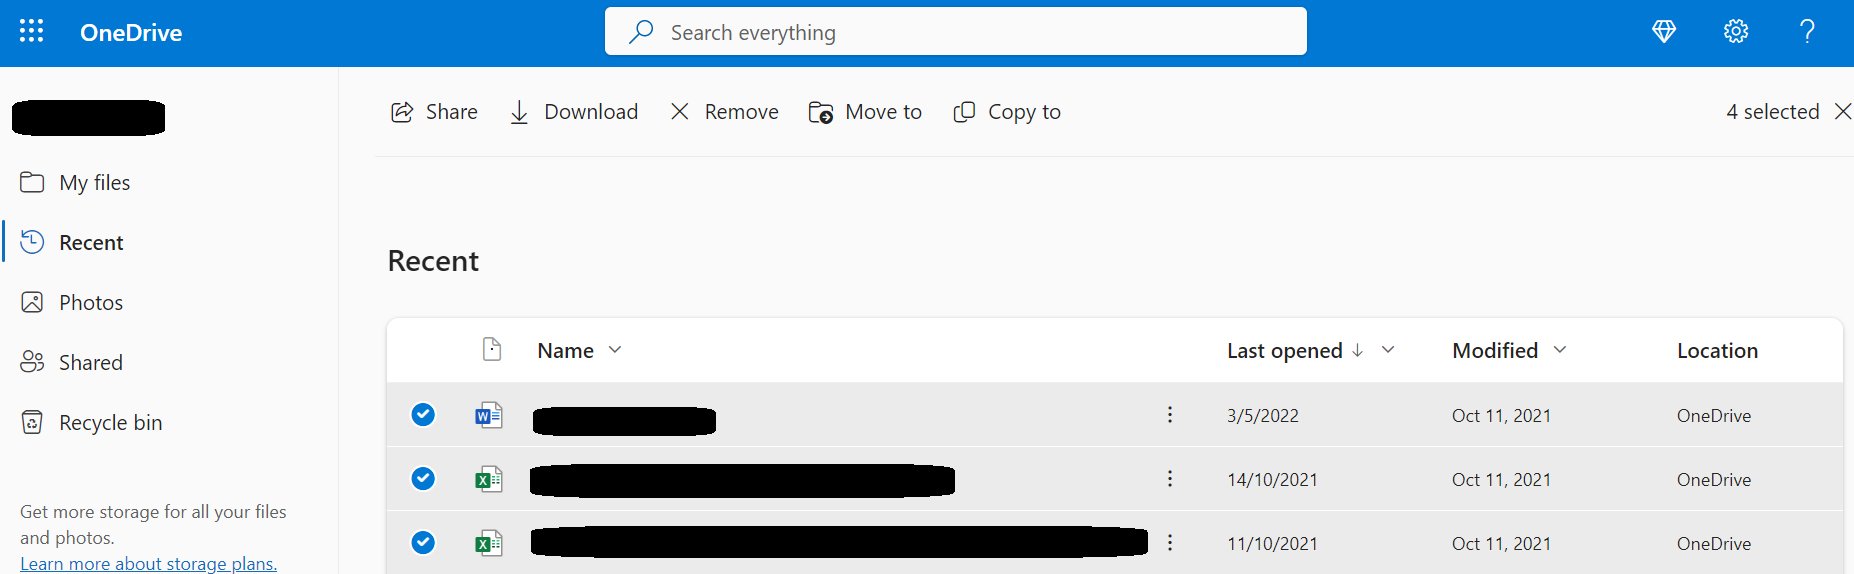 select the files that you want to download from the onedrive account